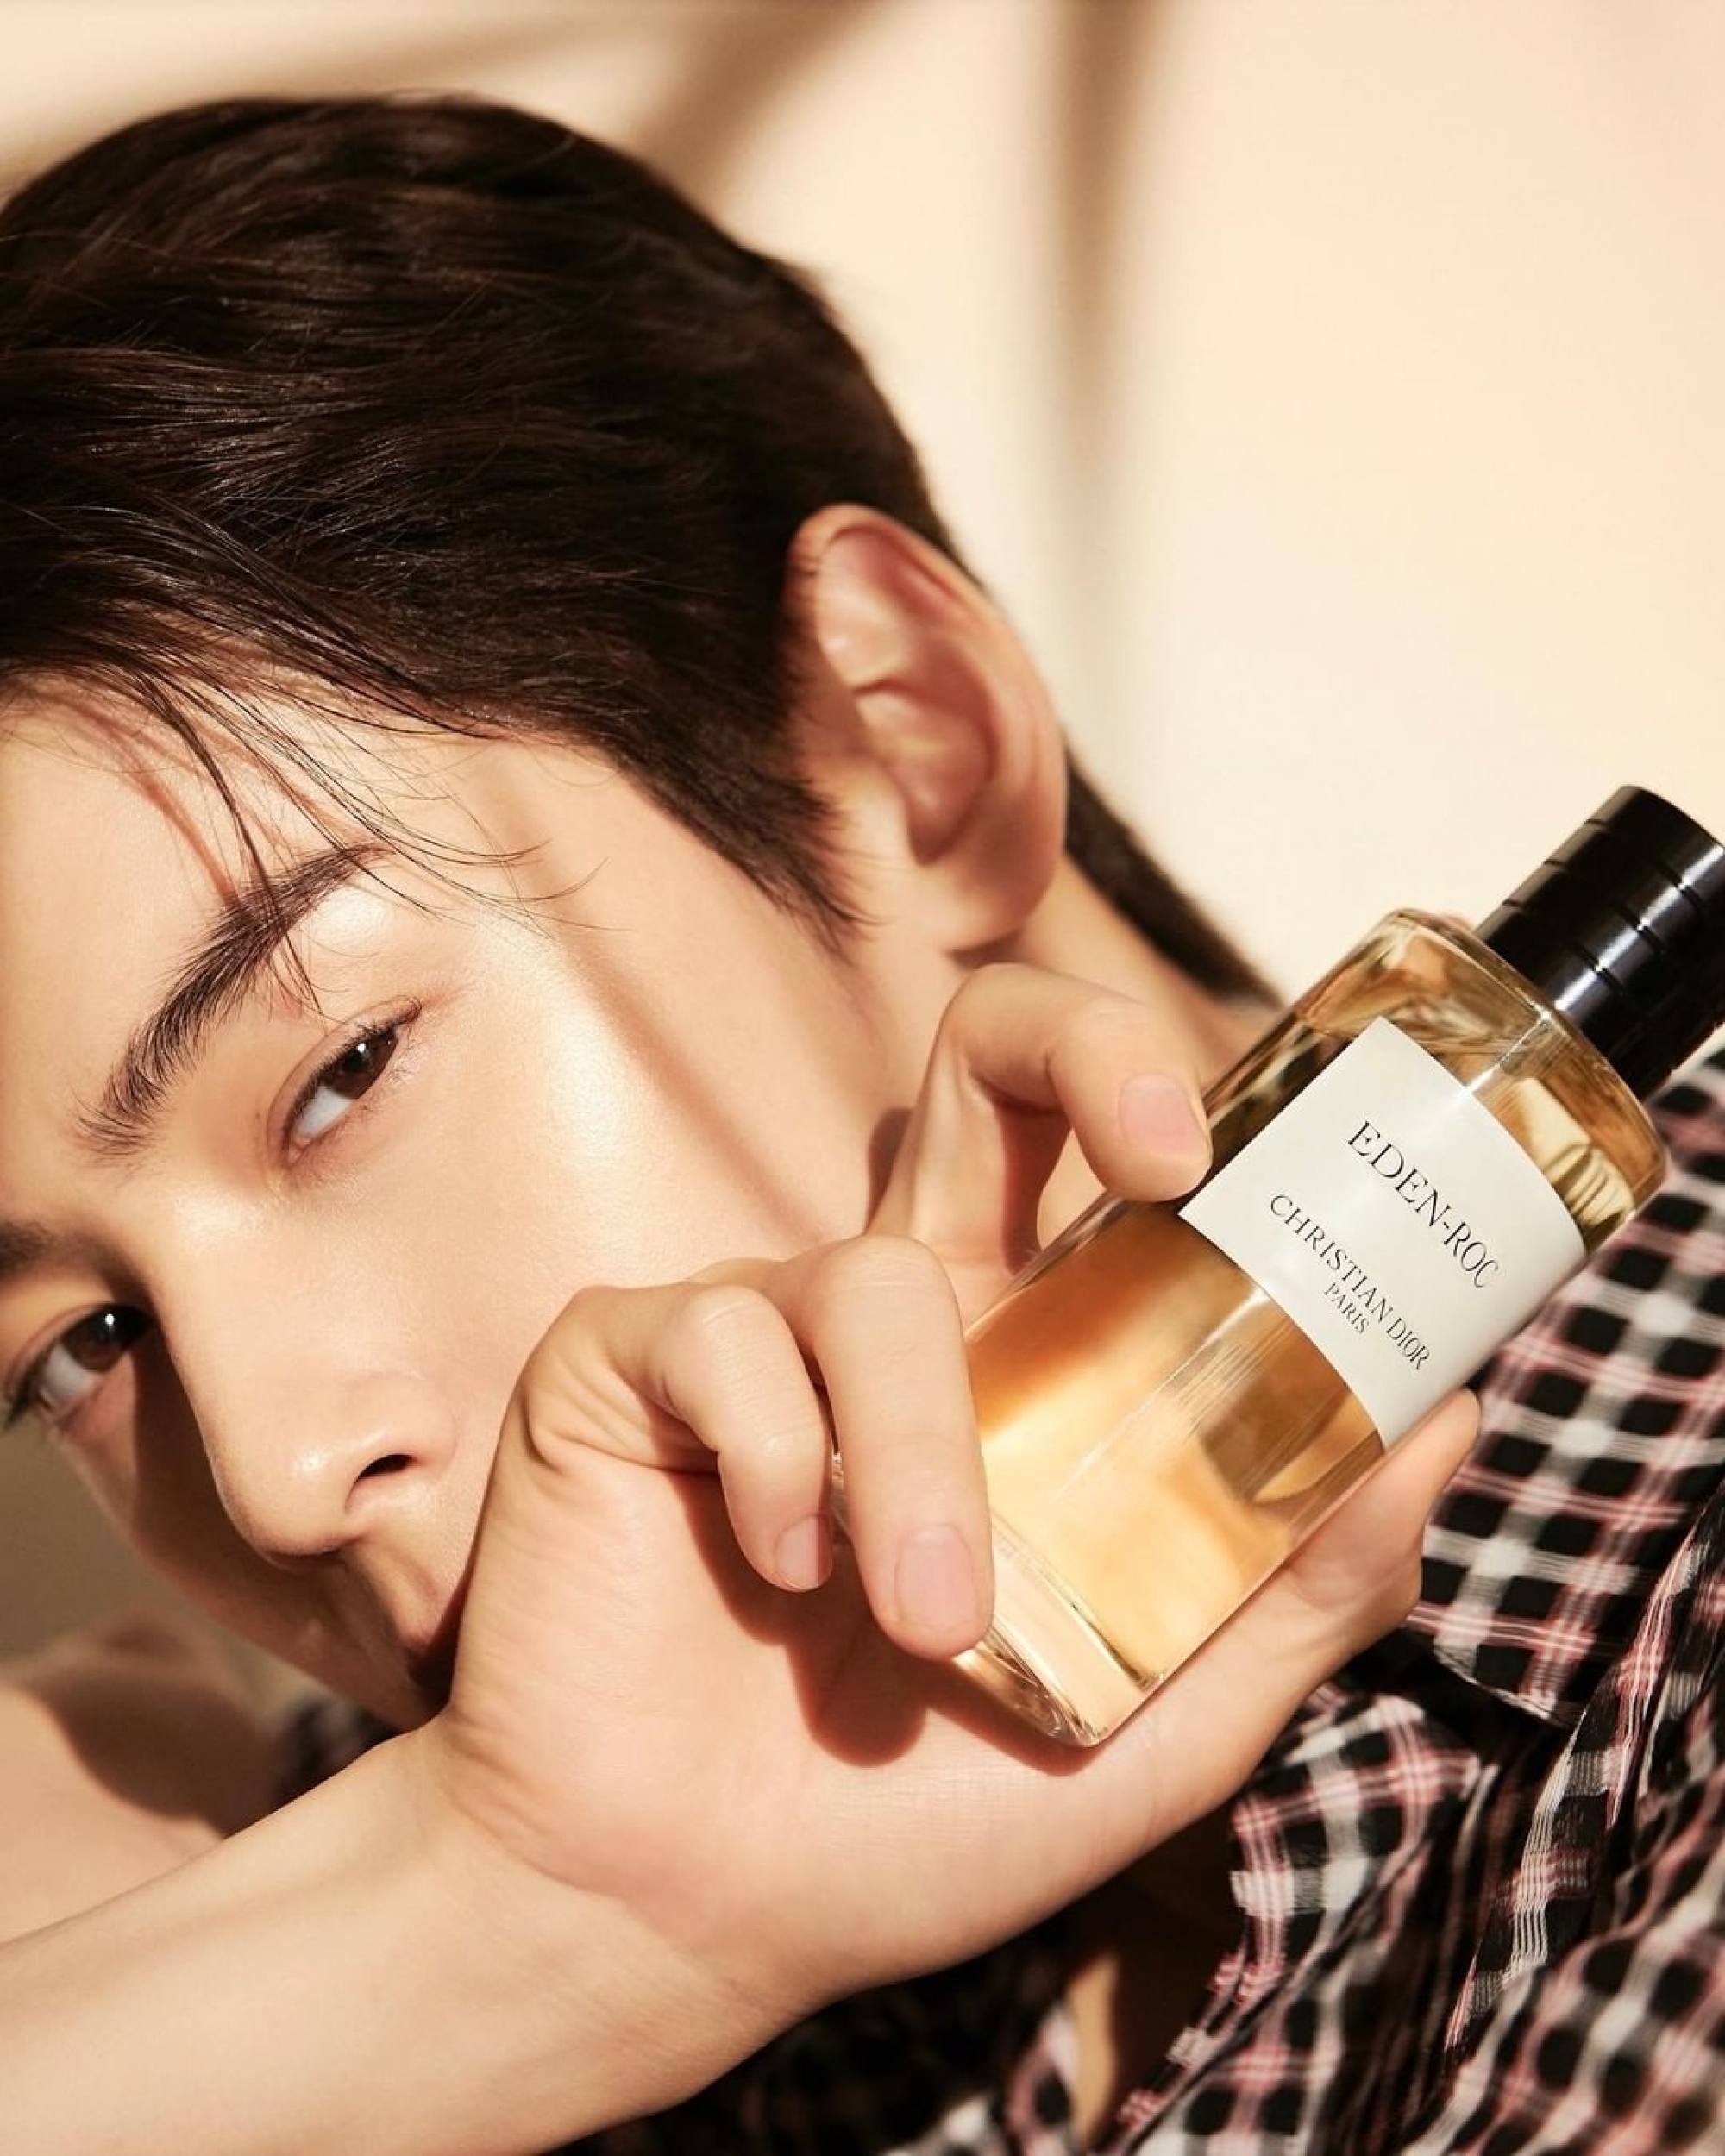 Cha Eun Woo stars in the Maison's latest Liens campaign